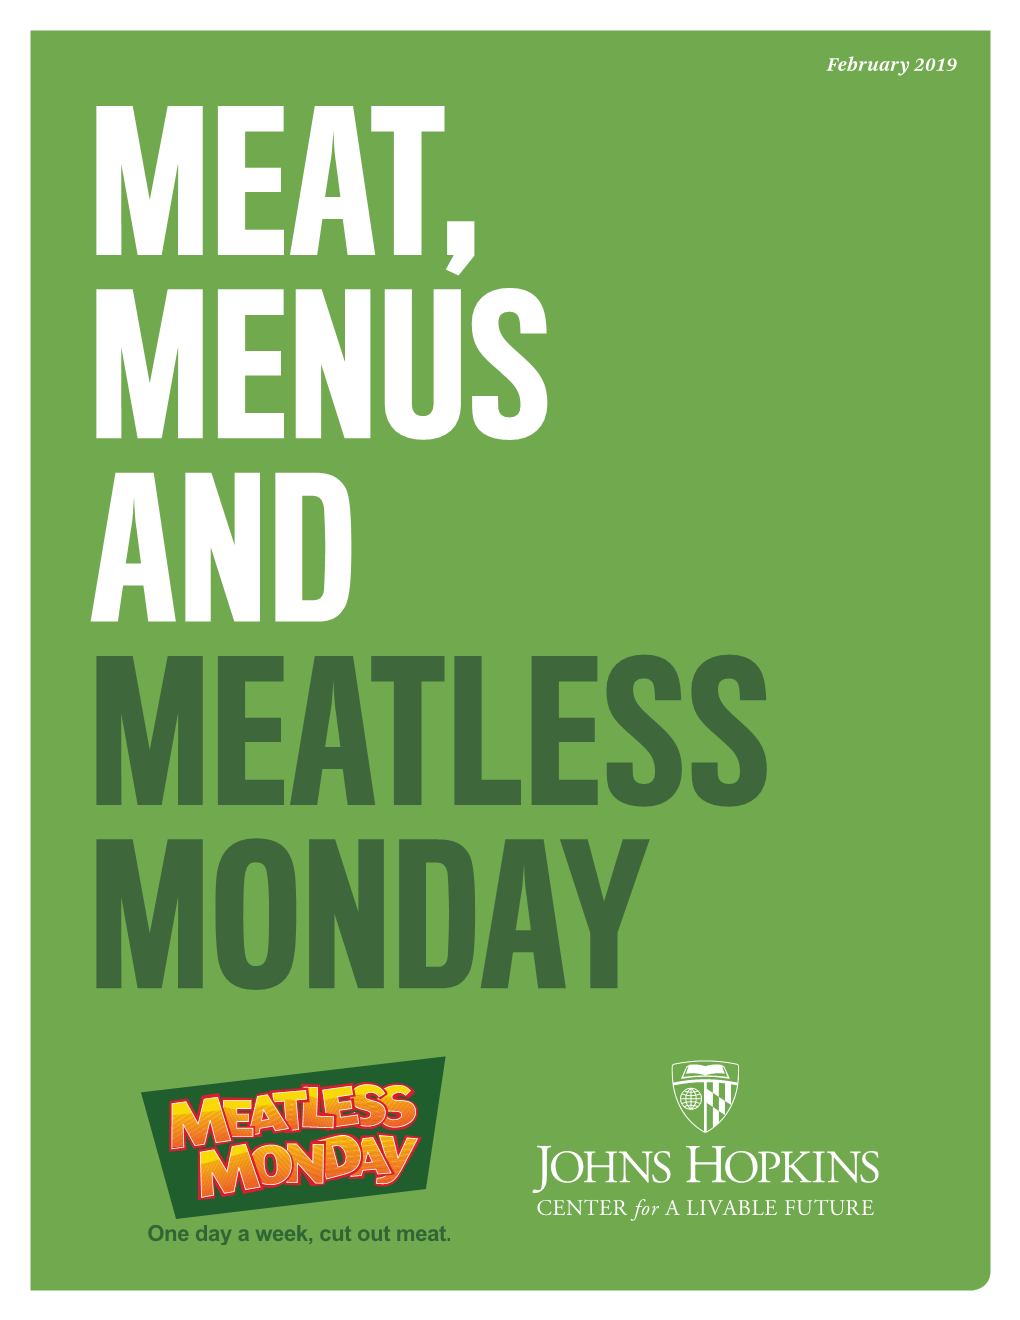 Meals, Menus and Meatless Monday